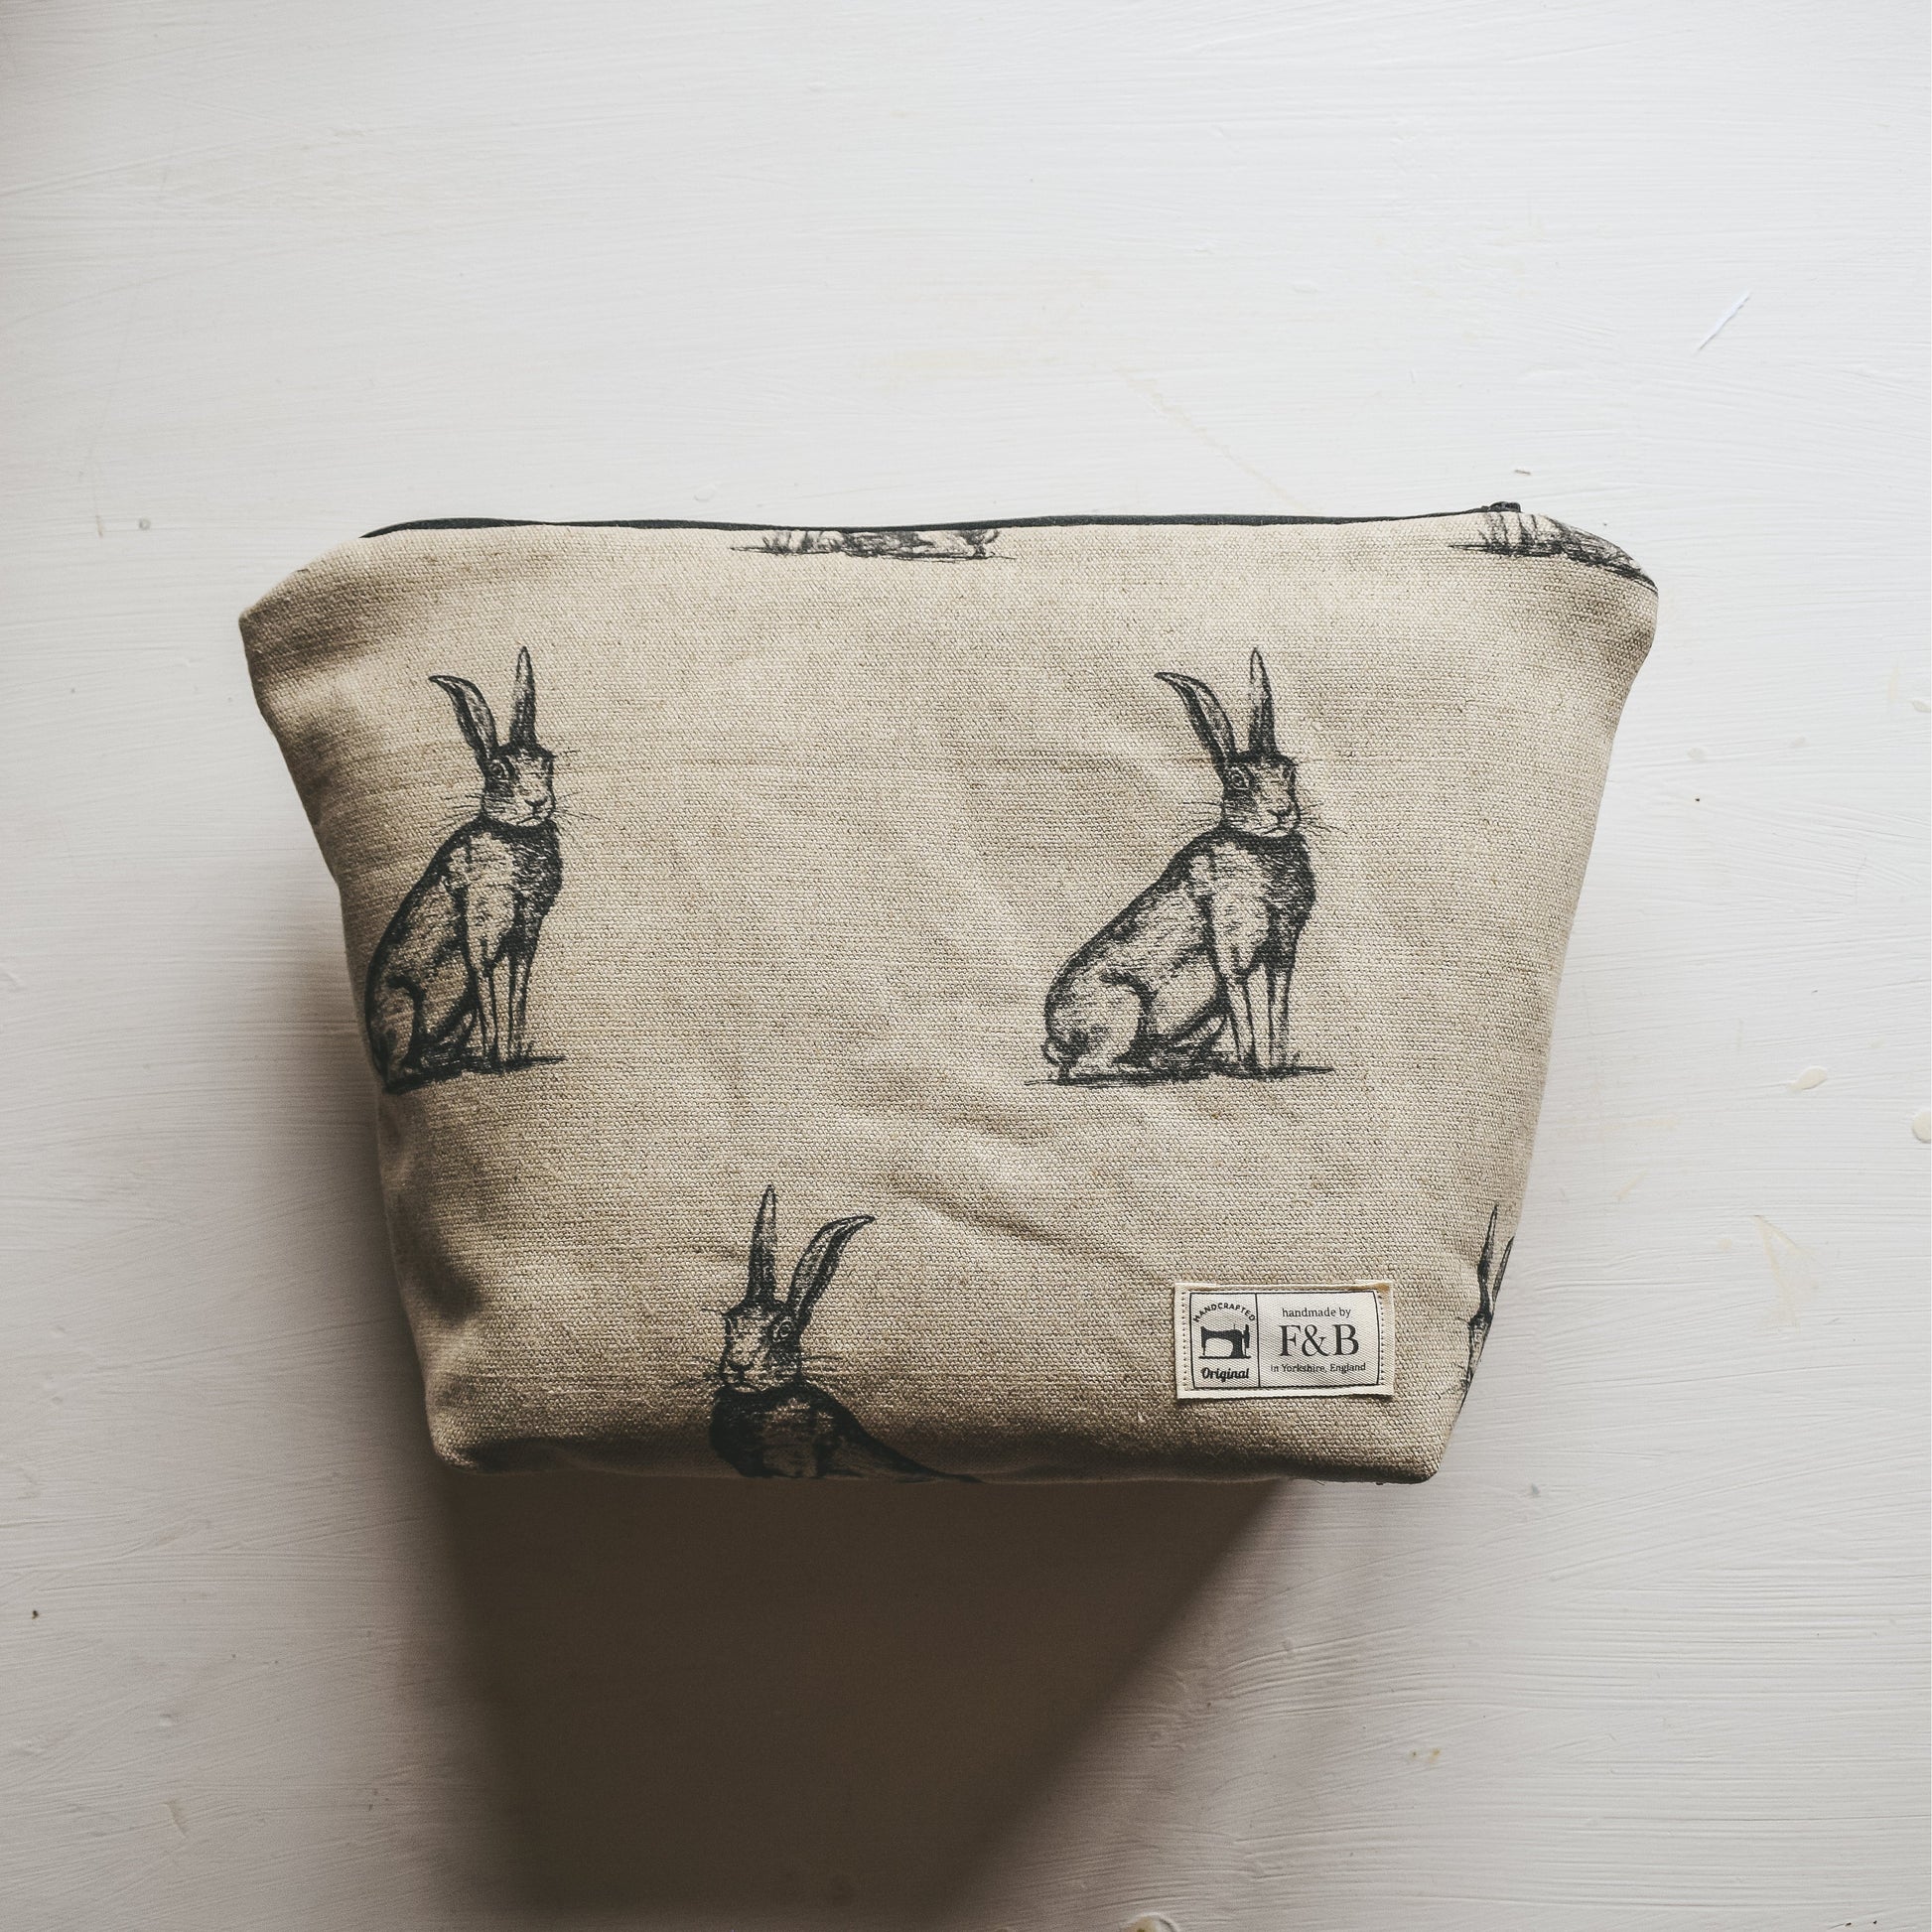 Ink drawing hare print wash bag or make up bag - waterproof lined and handmade in Yorkshire by F&B